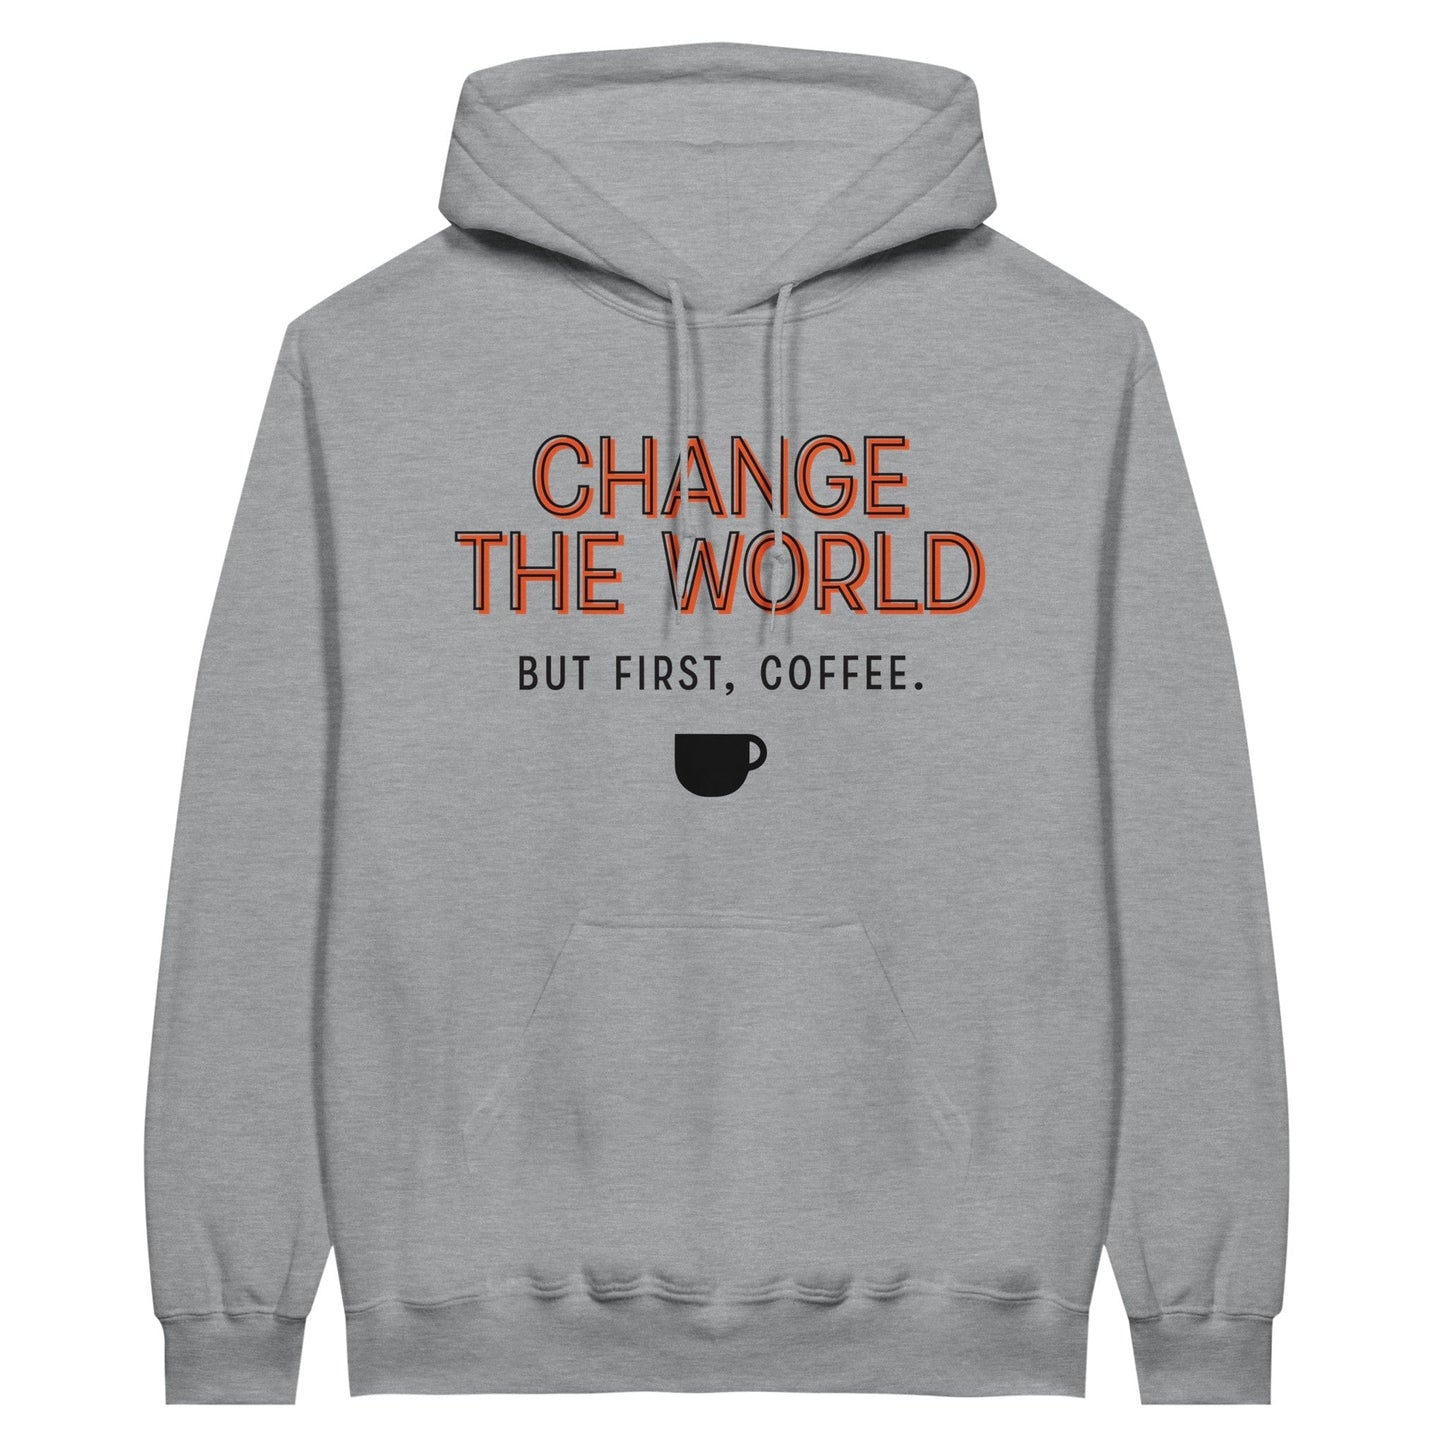 Good Bean Gifts "Change The World - But First Coffee" - Classic Unisex Pullover Hoodie Sports Grey / S